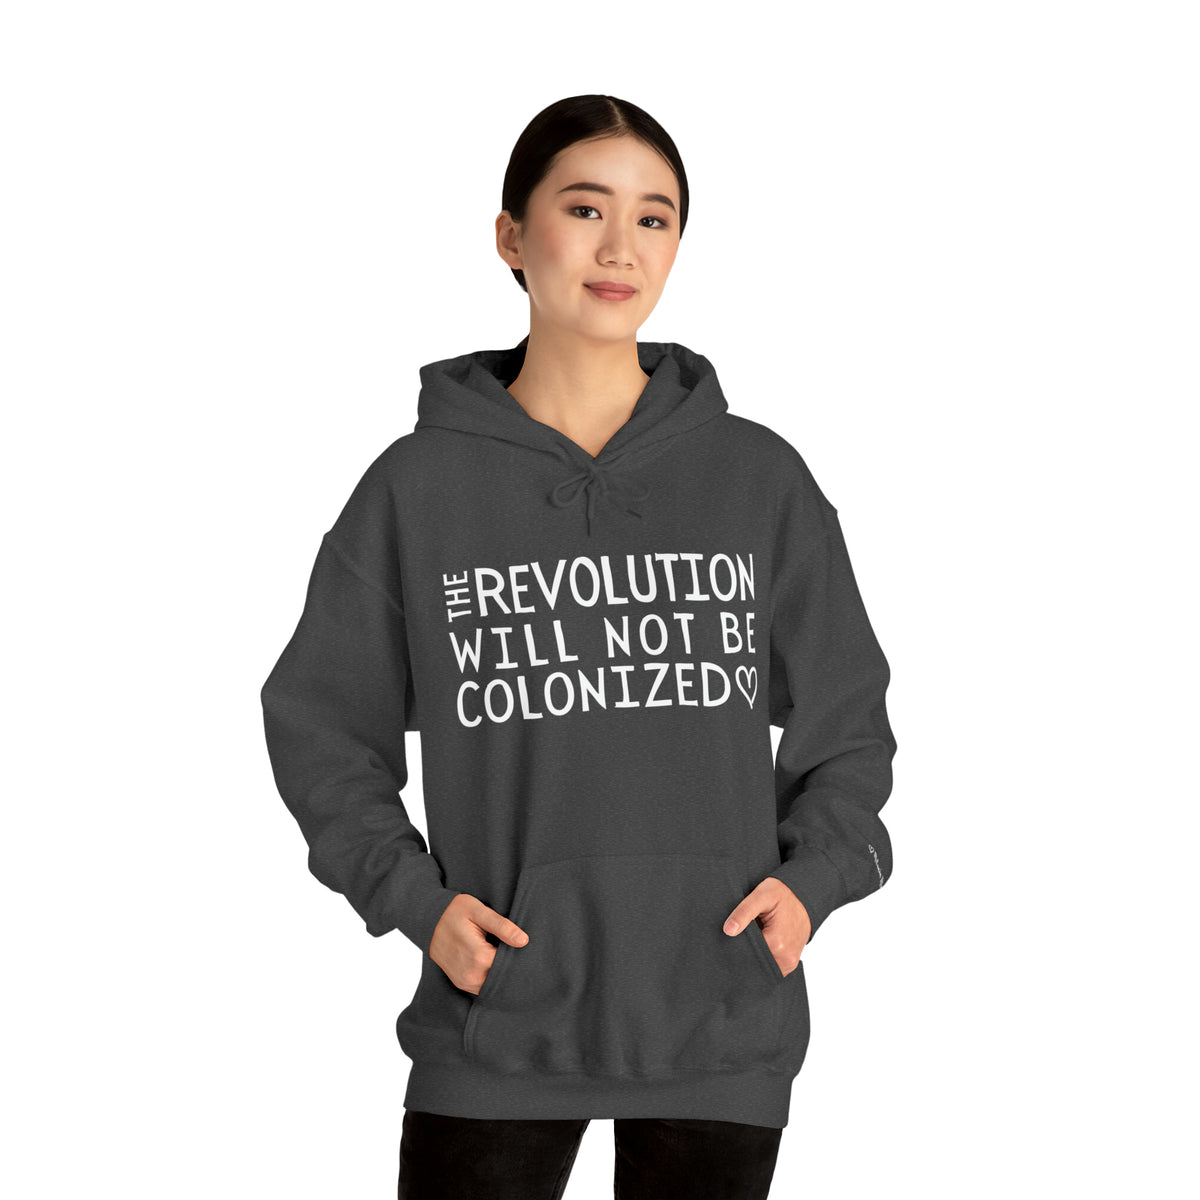 The Revolution Will Not Be Colonized - Unisex Hooded Sweatshirt